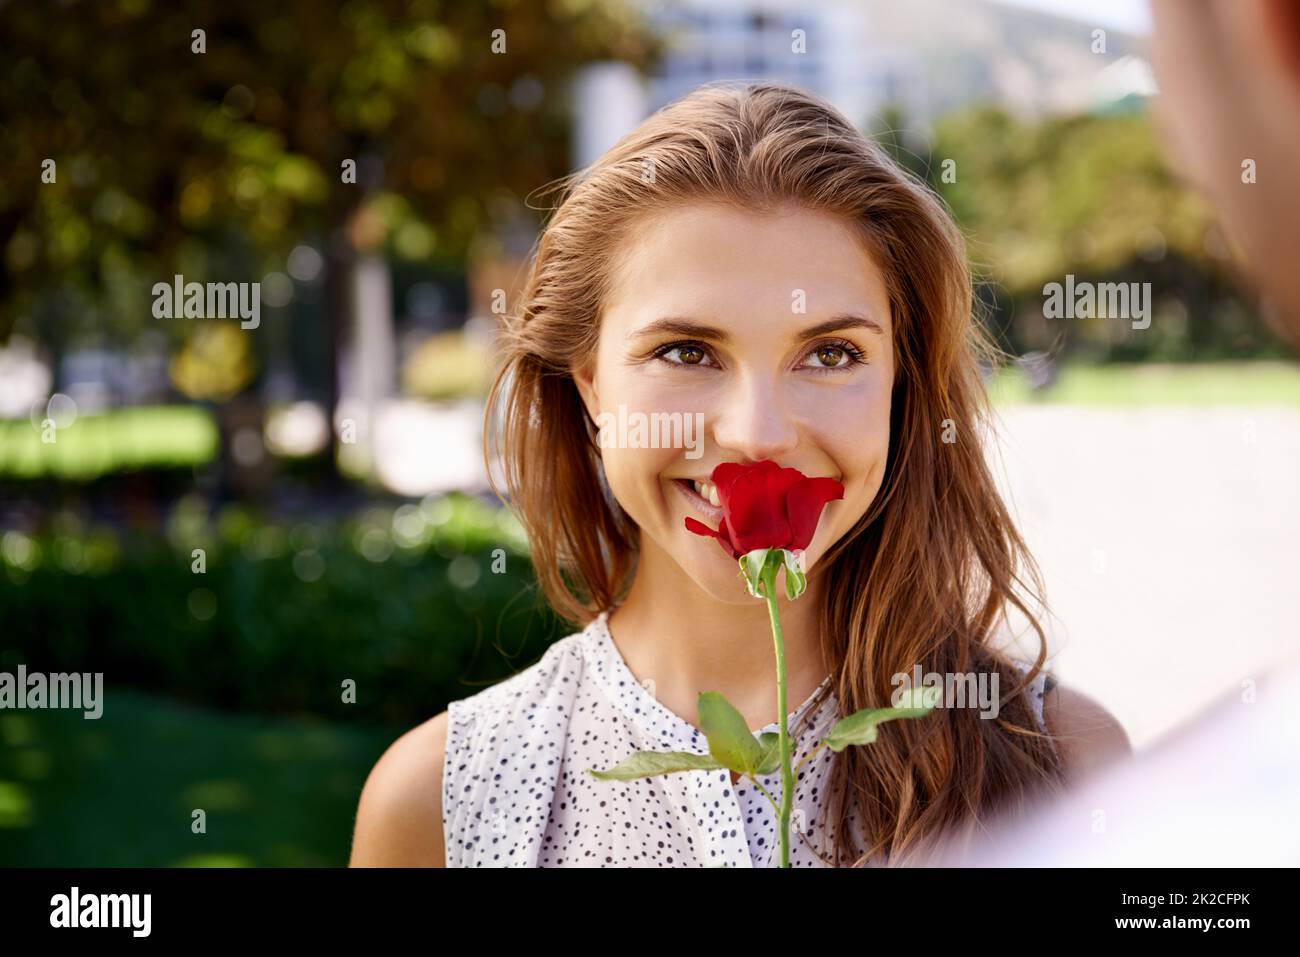 The sweet smell of love. Shot of a young woman smelling a rose her boyfriend is giving here. Stock Photo